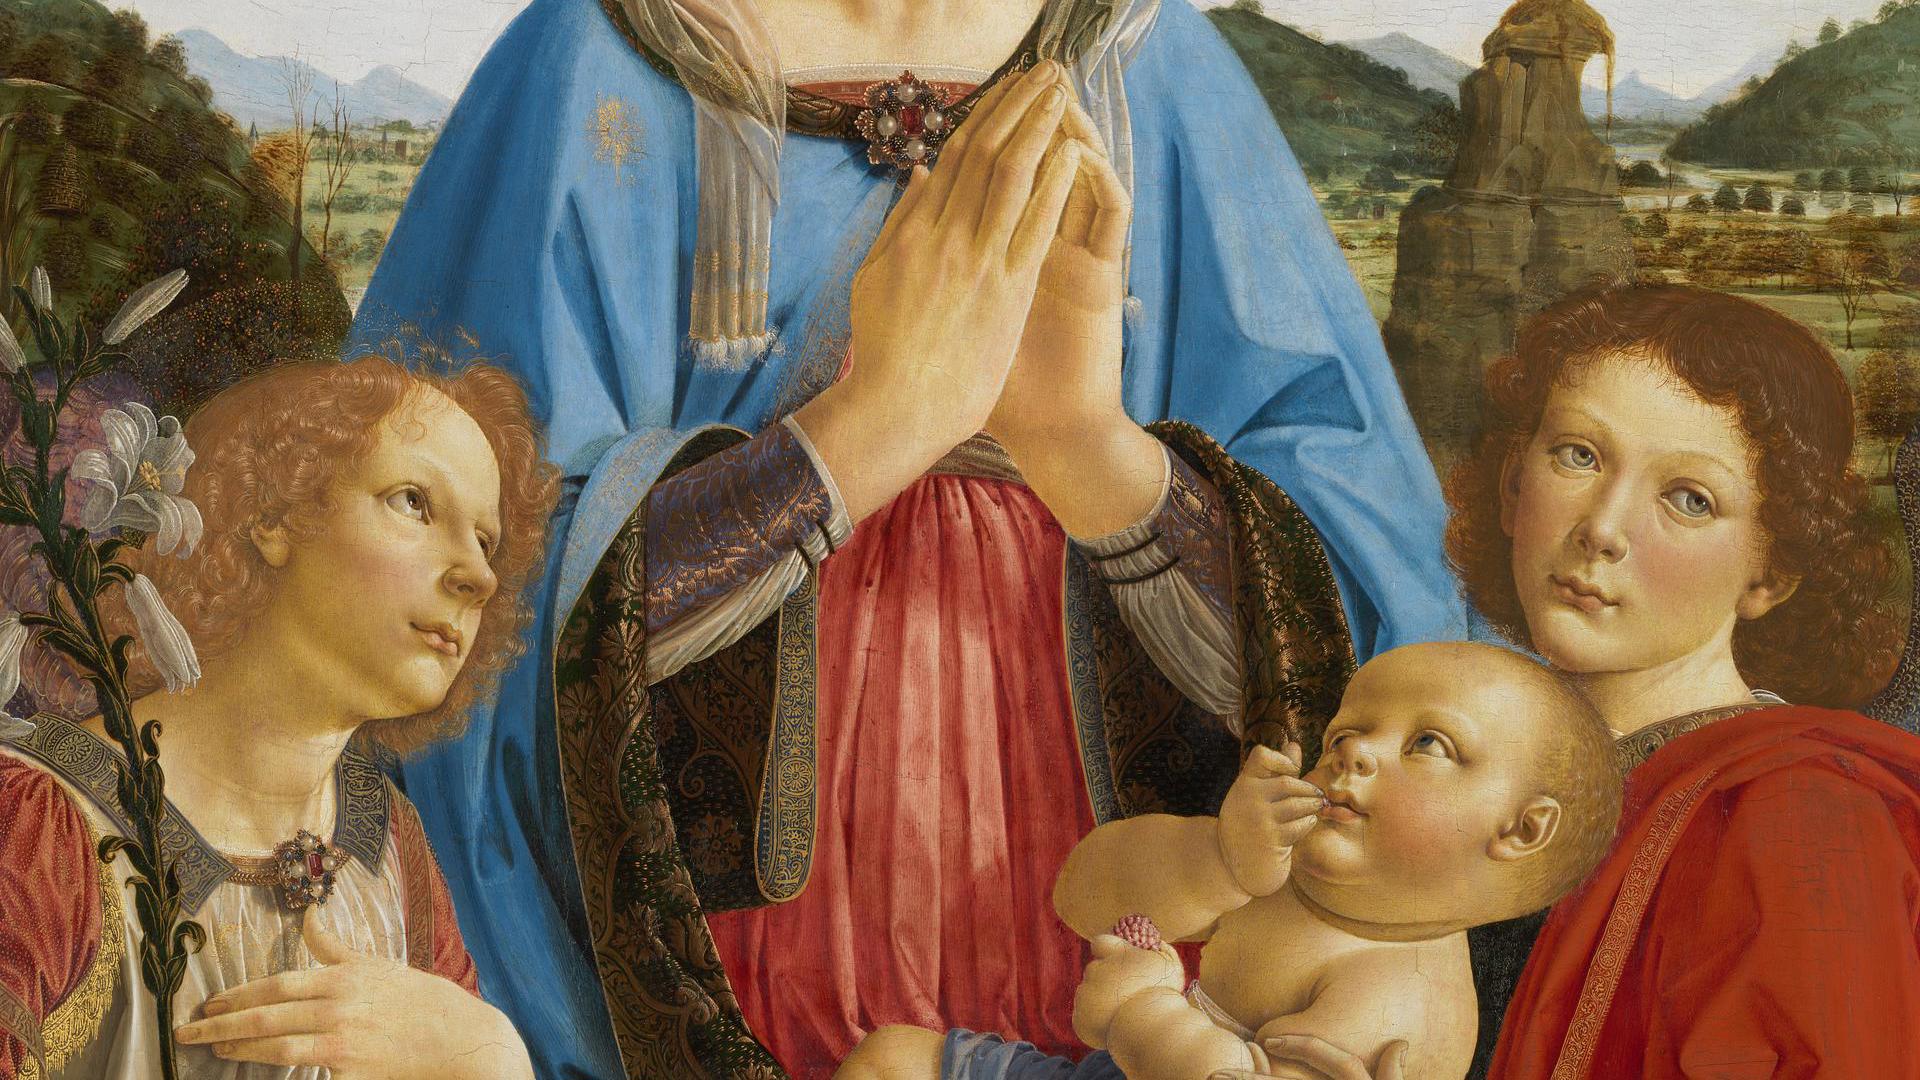 The Virgin and Child with Two Angels by Andrea del Verrocchio and assistant ( Lorenzo di Credi )